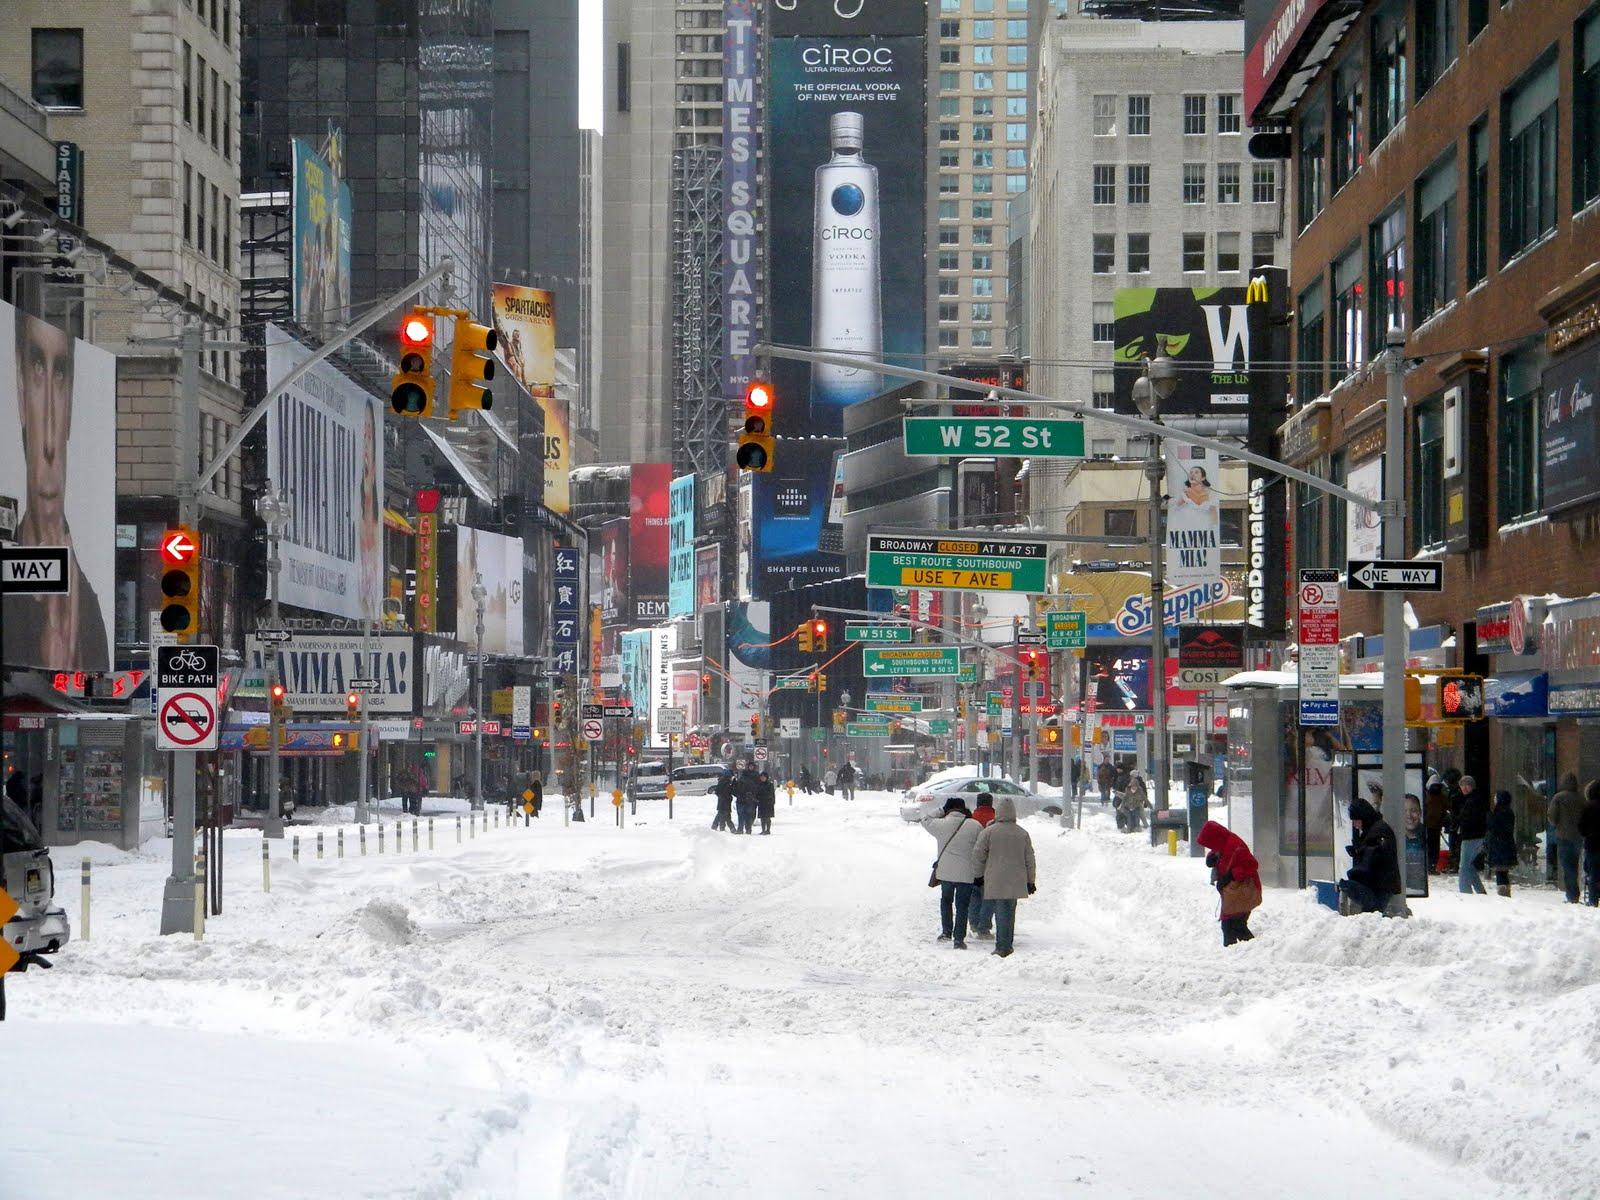 New York Winter Wallpapers Top Free New York Winter Backgrounds